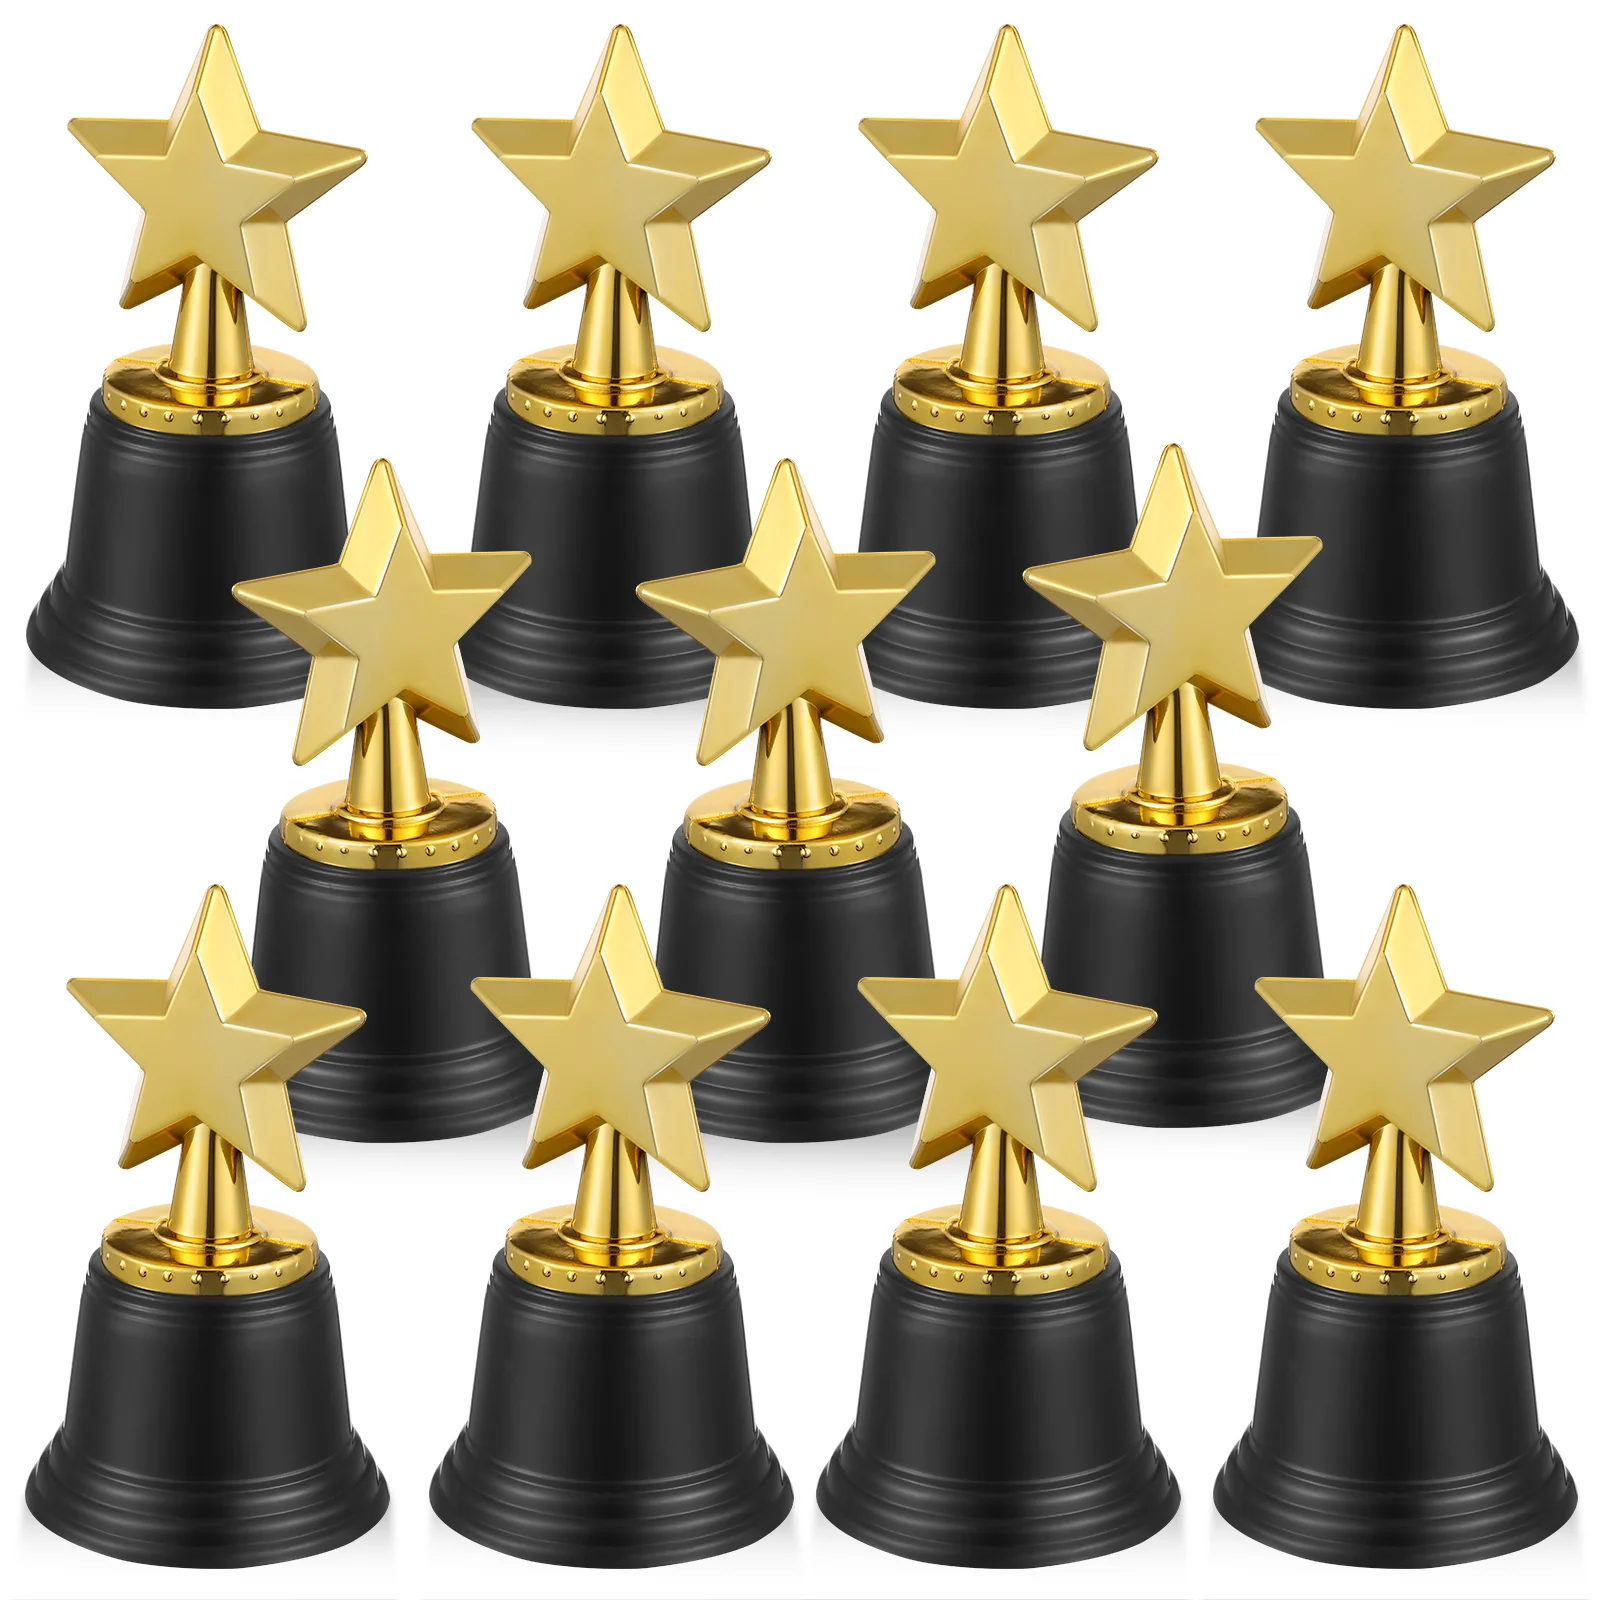 Trophy Kids Award Trophies Party Star Awards Five Cup Point Mini Sports Prize Plastic Gold Cups Decor Toy Winning Medals Trophie trophy trophies award kids gold awards thumb up reward sports plastic thumbs winner prize party halloween soccer mini cup cups